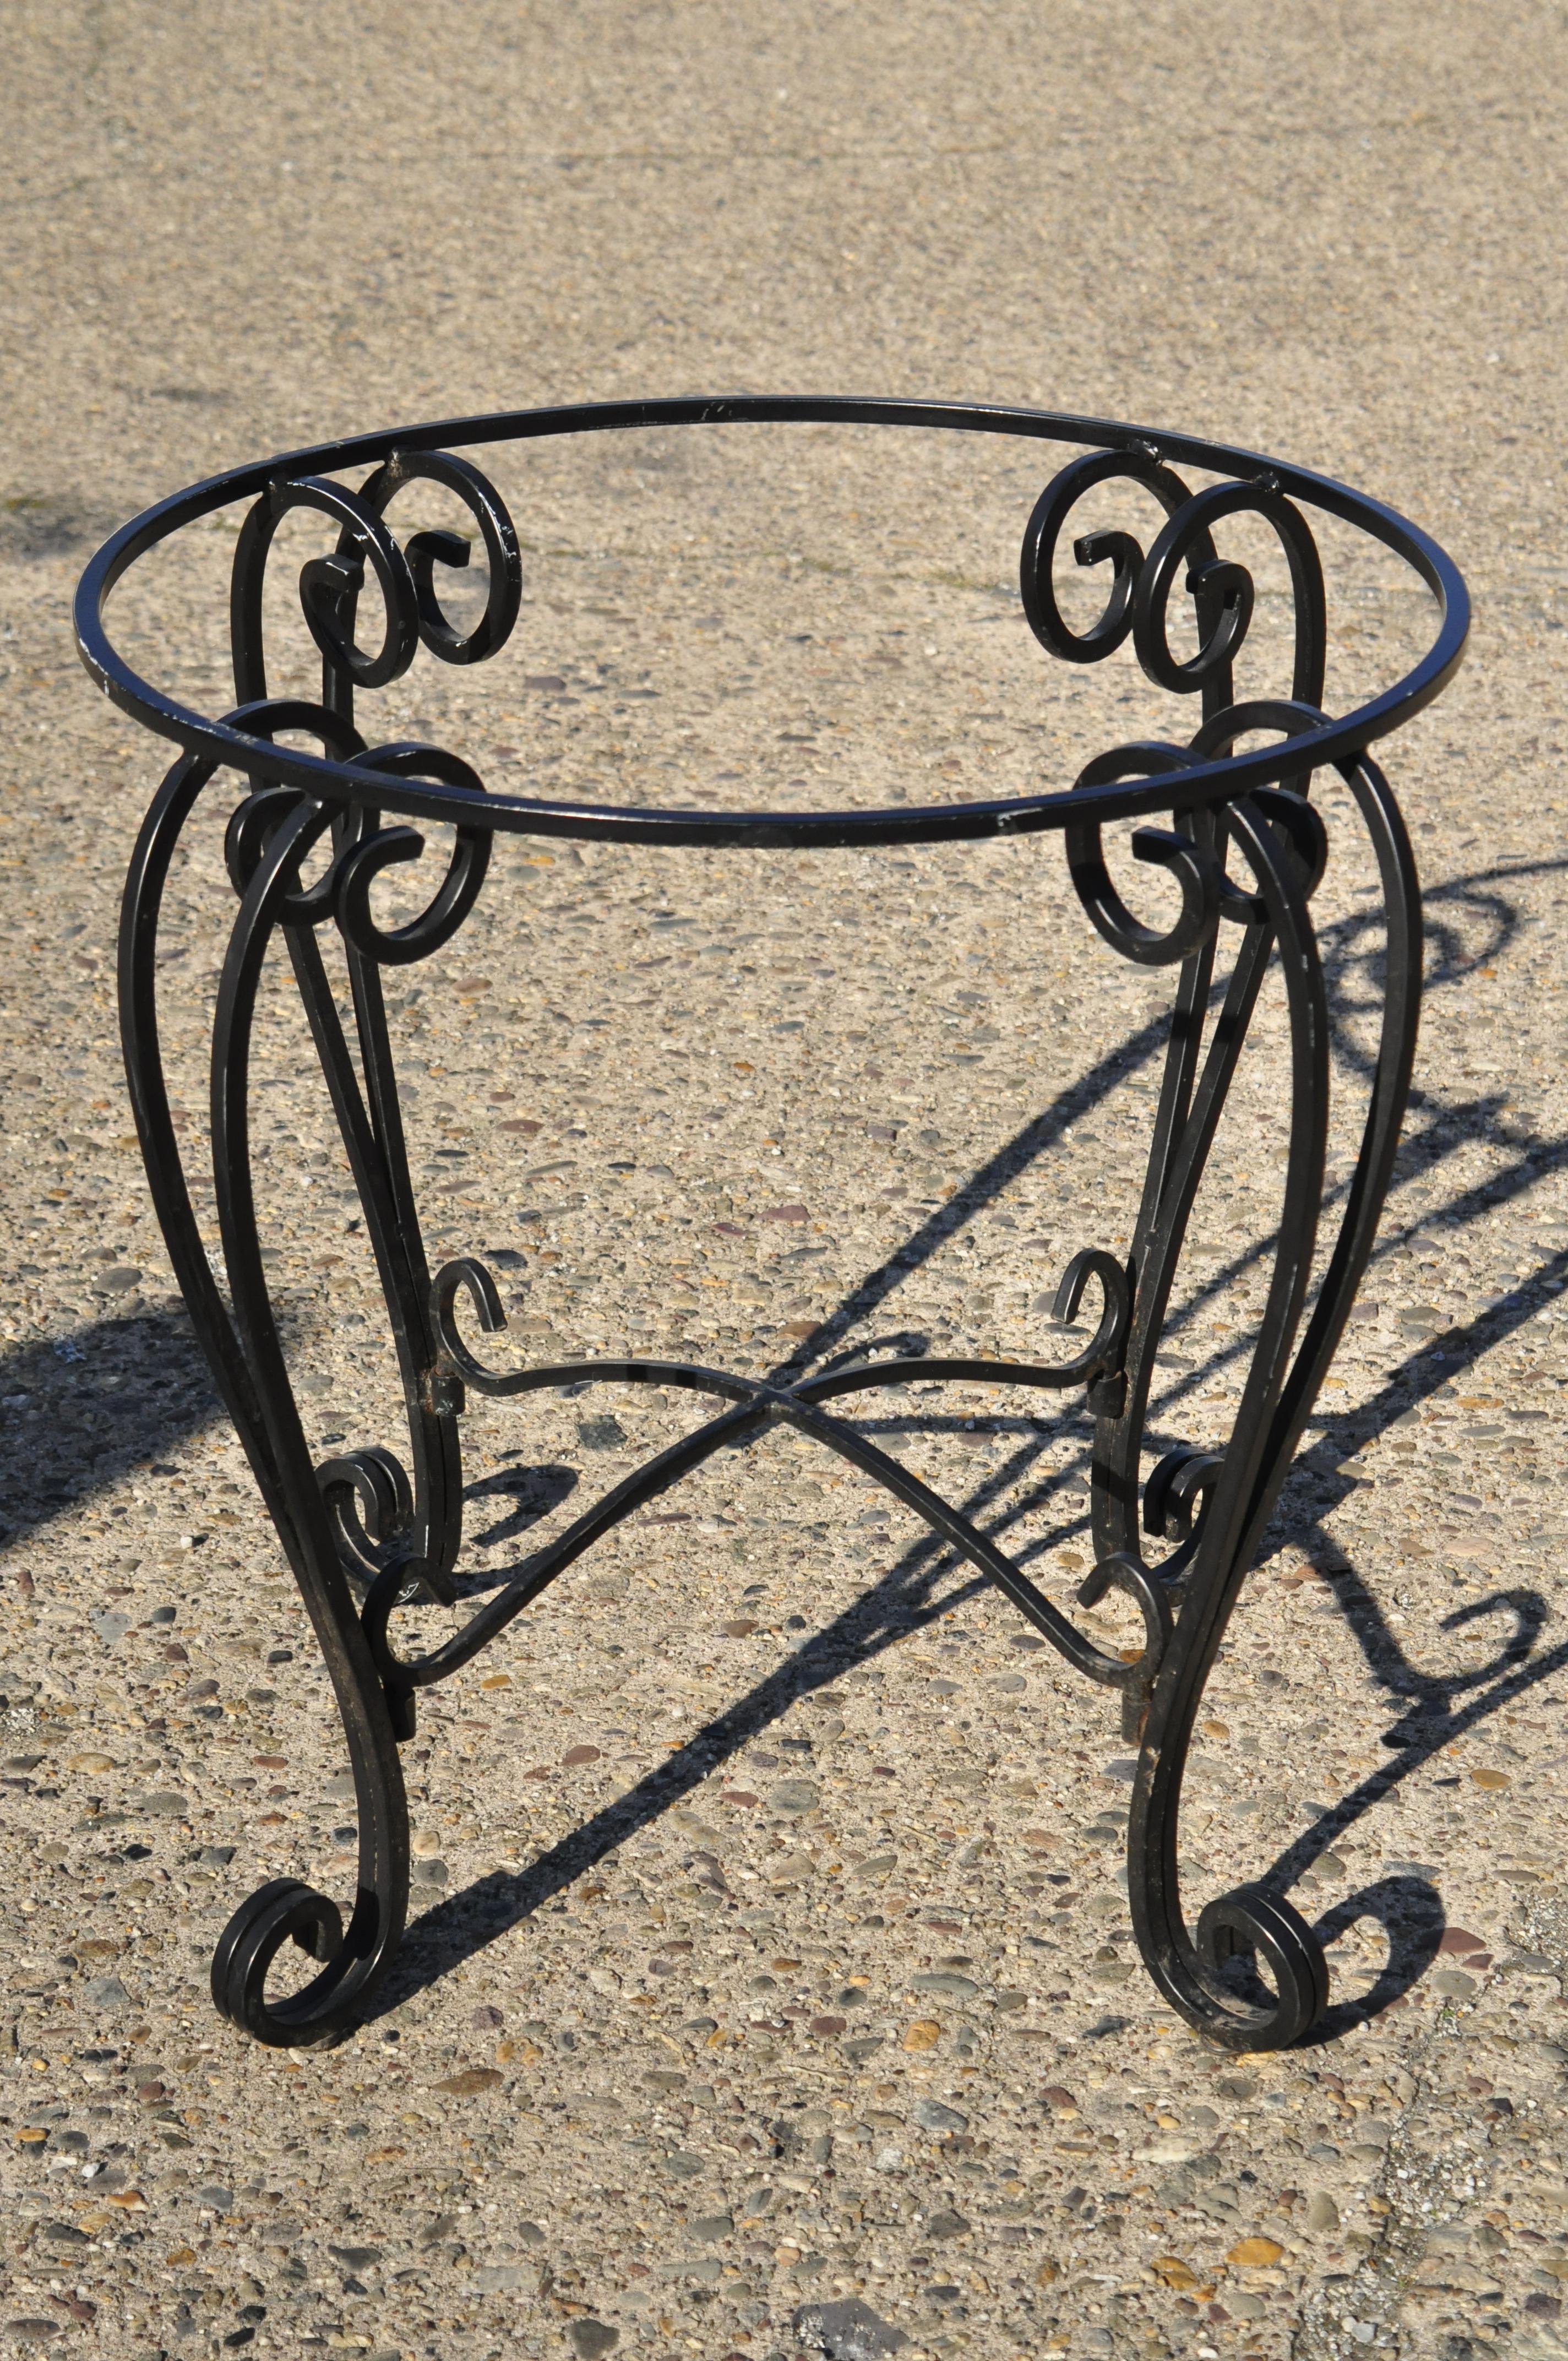 Vintage wrought iron round scrollwork pedestal base dining room table. Item features heavy wrought iron scrolling base, round frame, stretcher support, quality craftsmanship, great style and form, circa mid-late 20th century. Measurements: 29